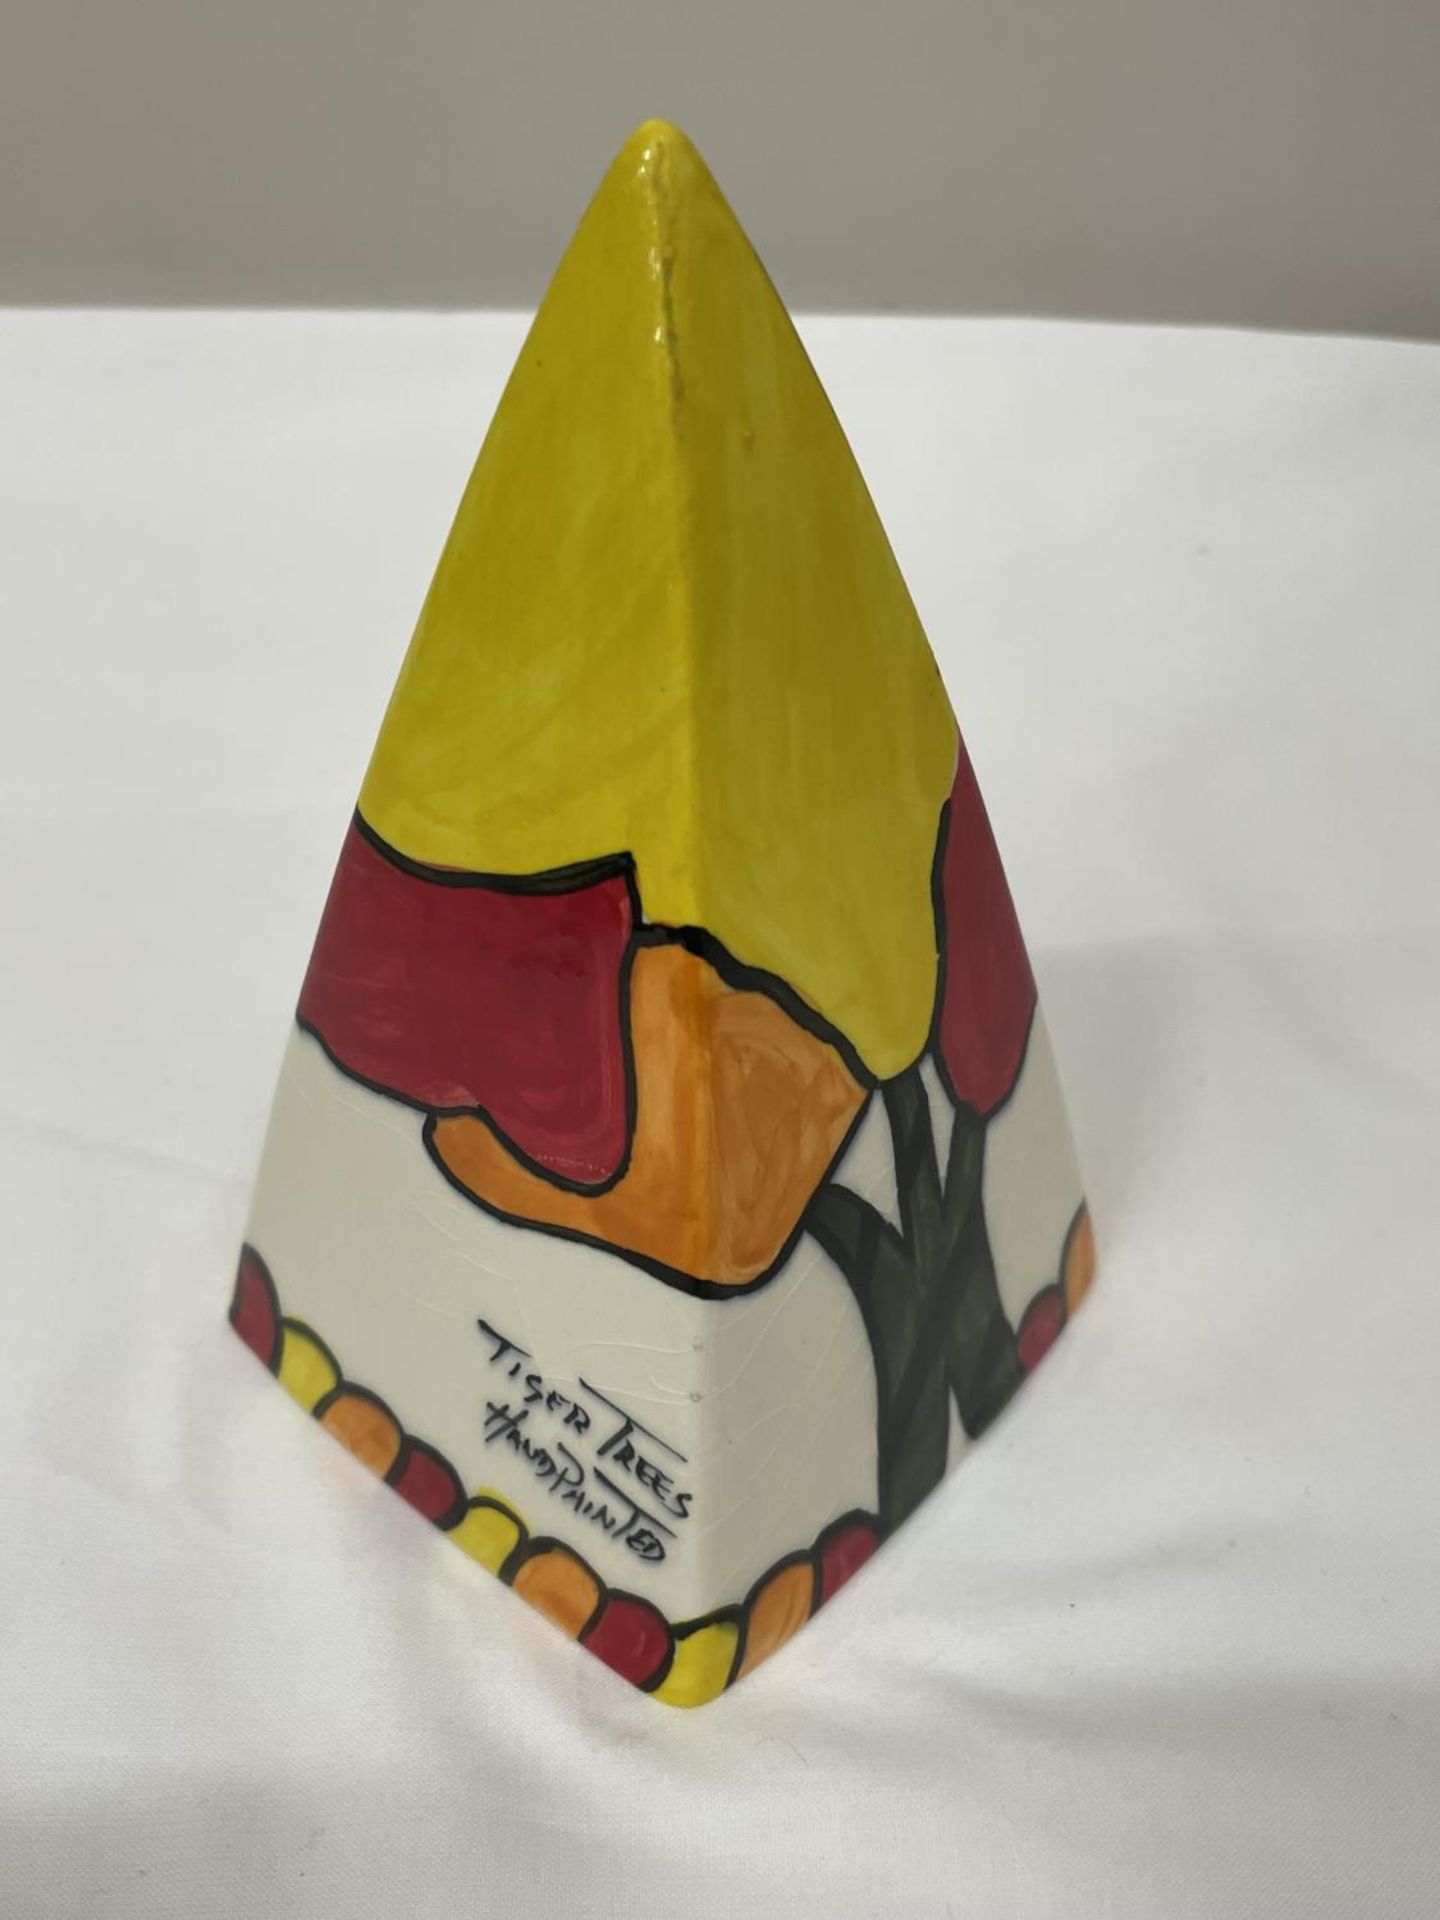 A HANDPAINTED IN STAFFORDSHIRE SUGAR SIFTER TIGER TREES DESIGN IN THE SHAPE OF A PYRAMID - Image 2 of 5